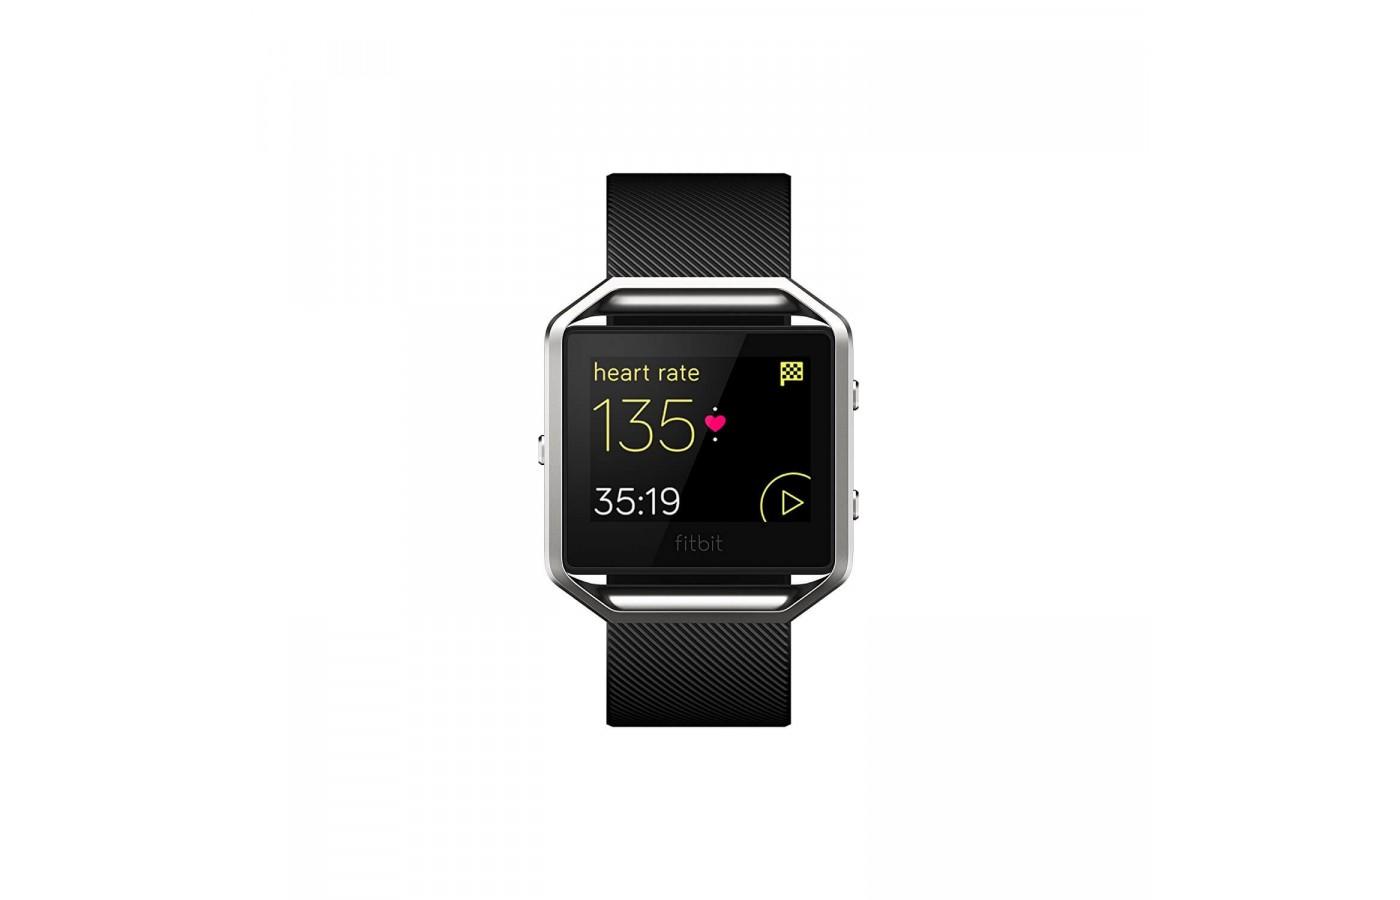 Fitbit Blaze has an easy to read screen and can be easily navigated through the touchscreen